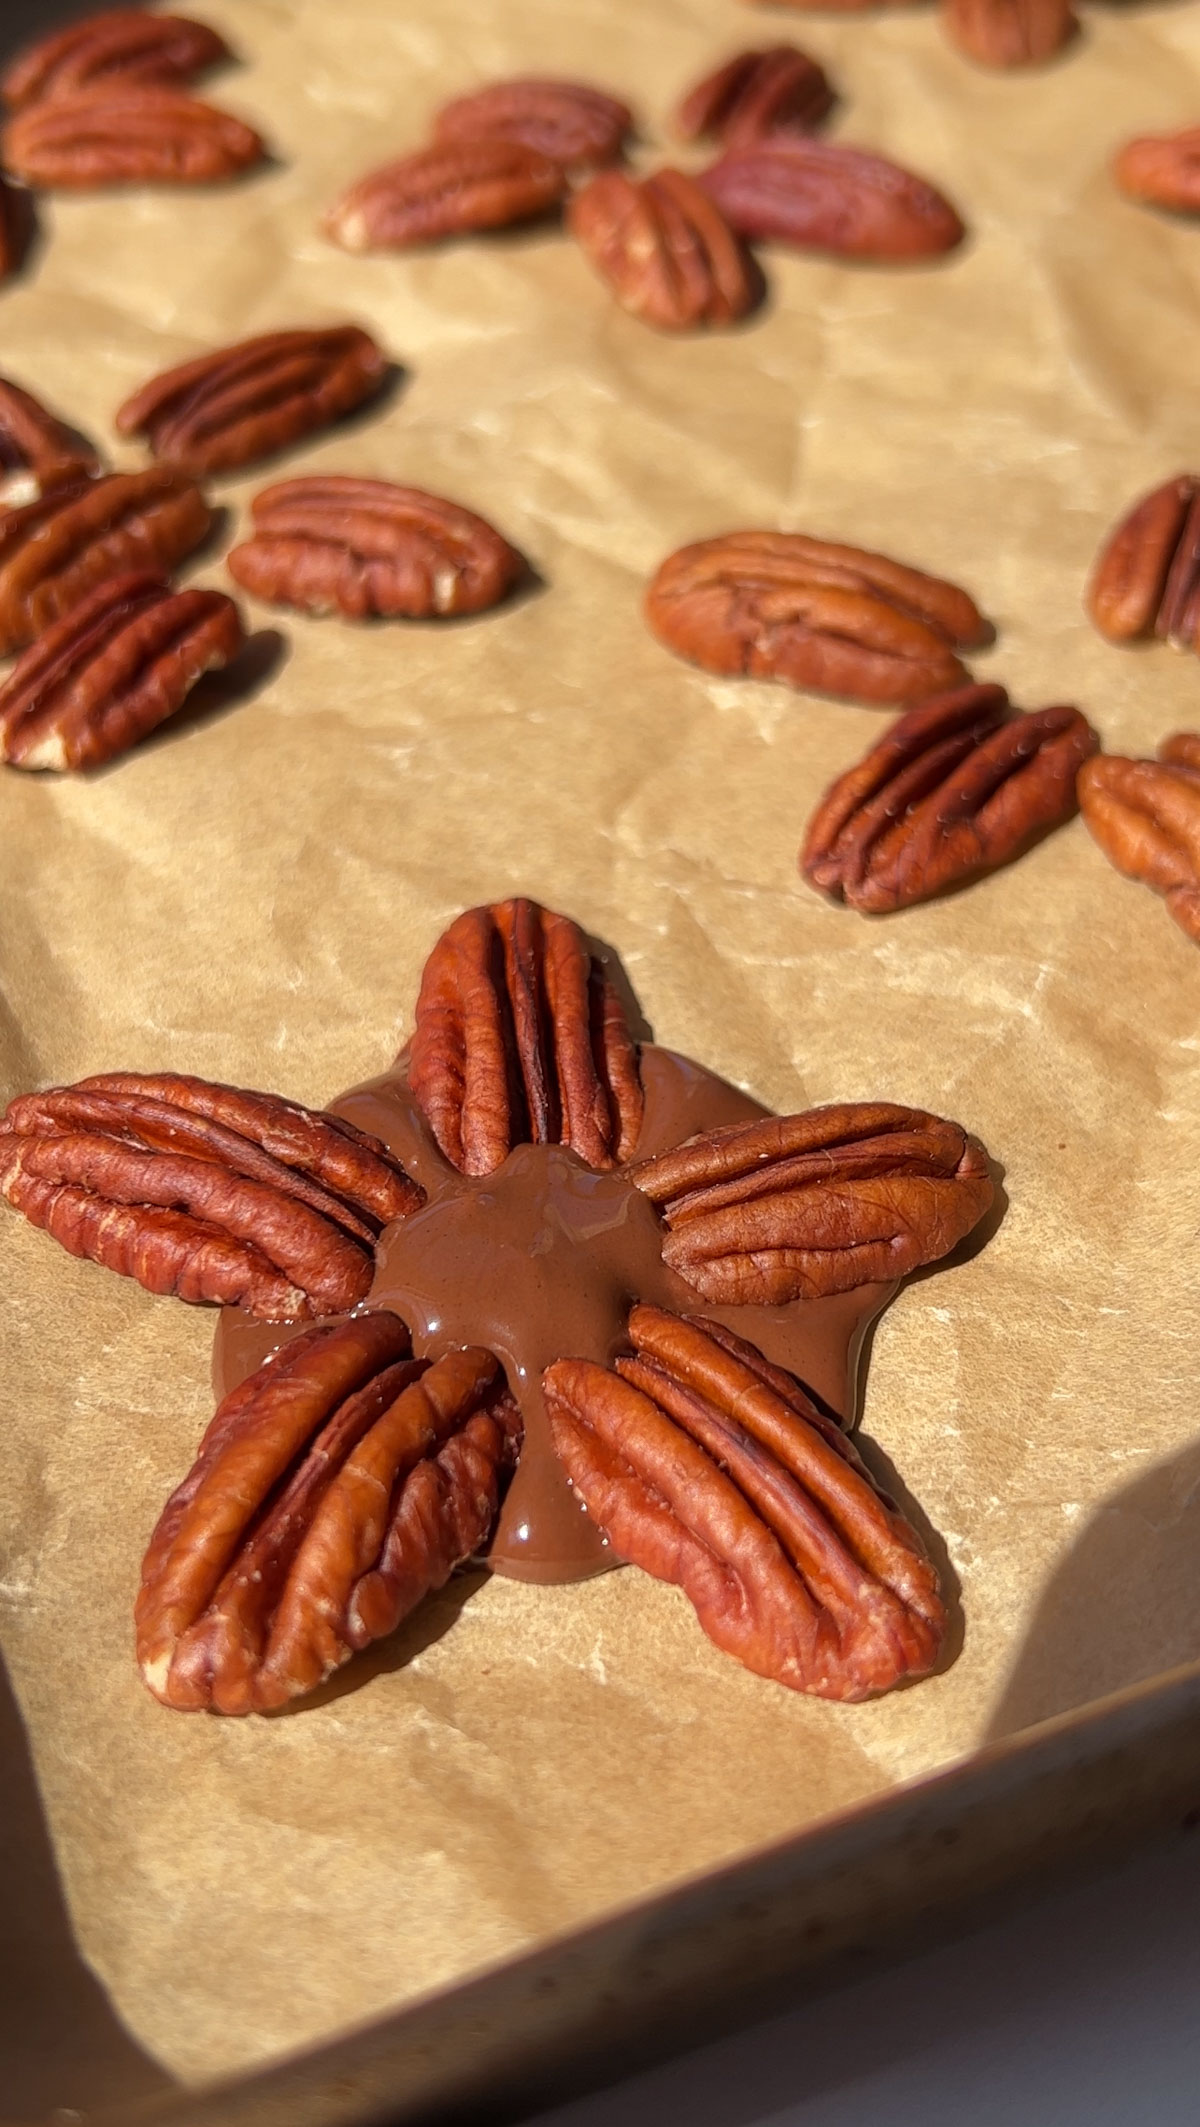 Five pecans arranged in the chocolate to make a star.